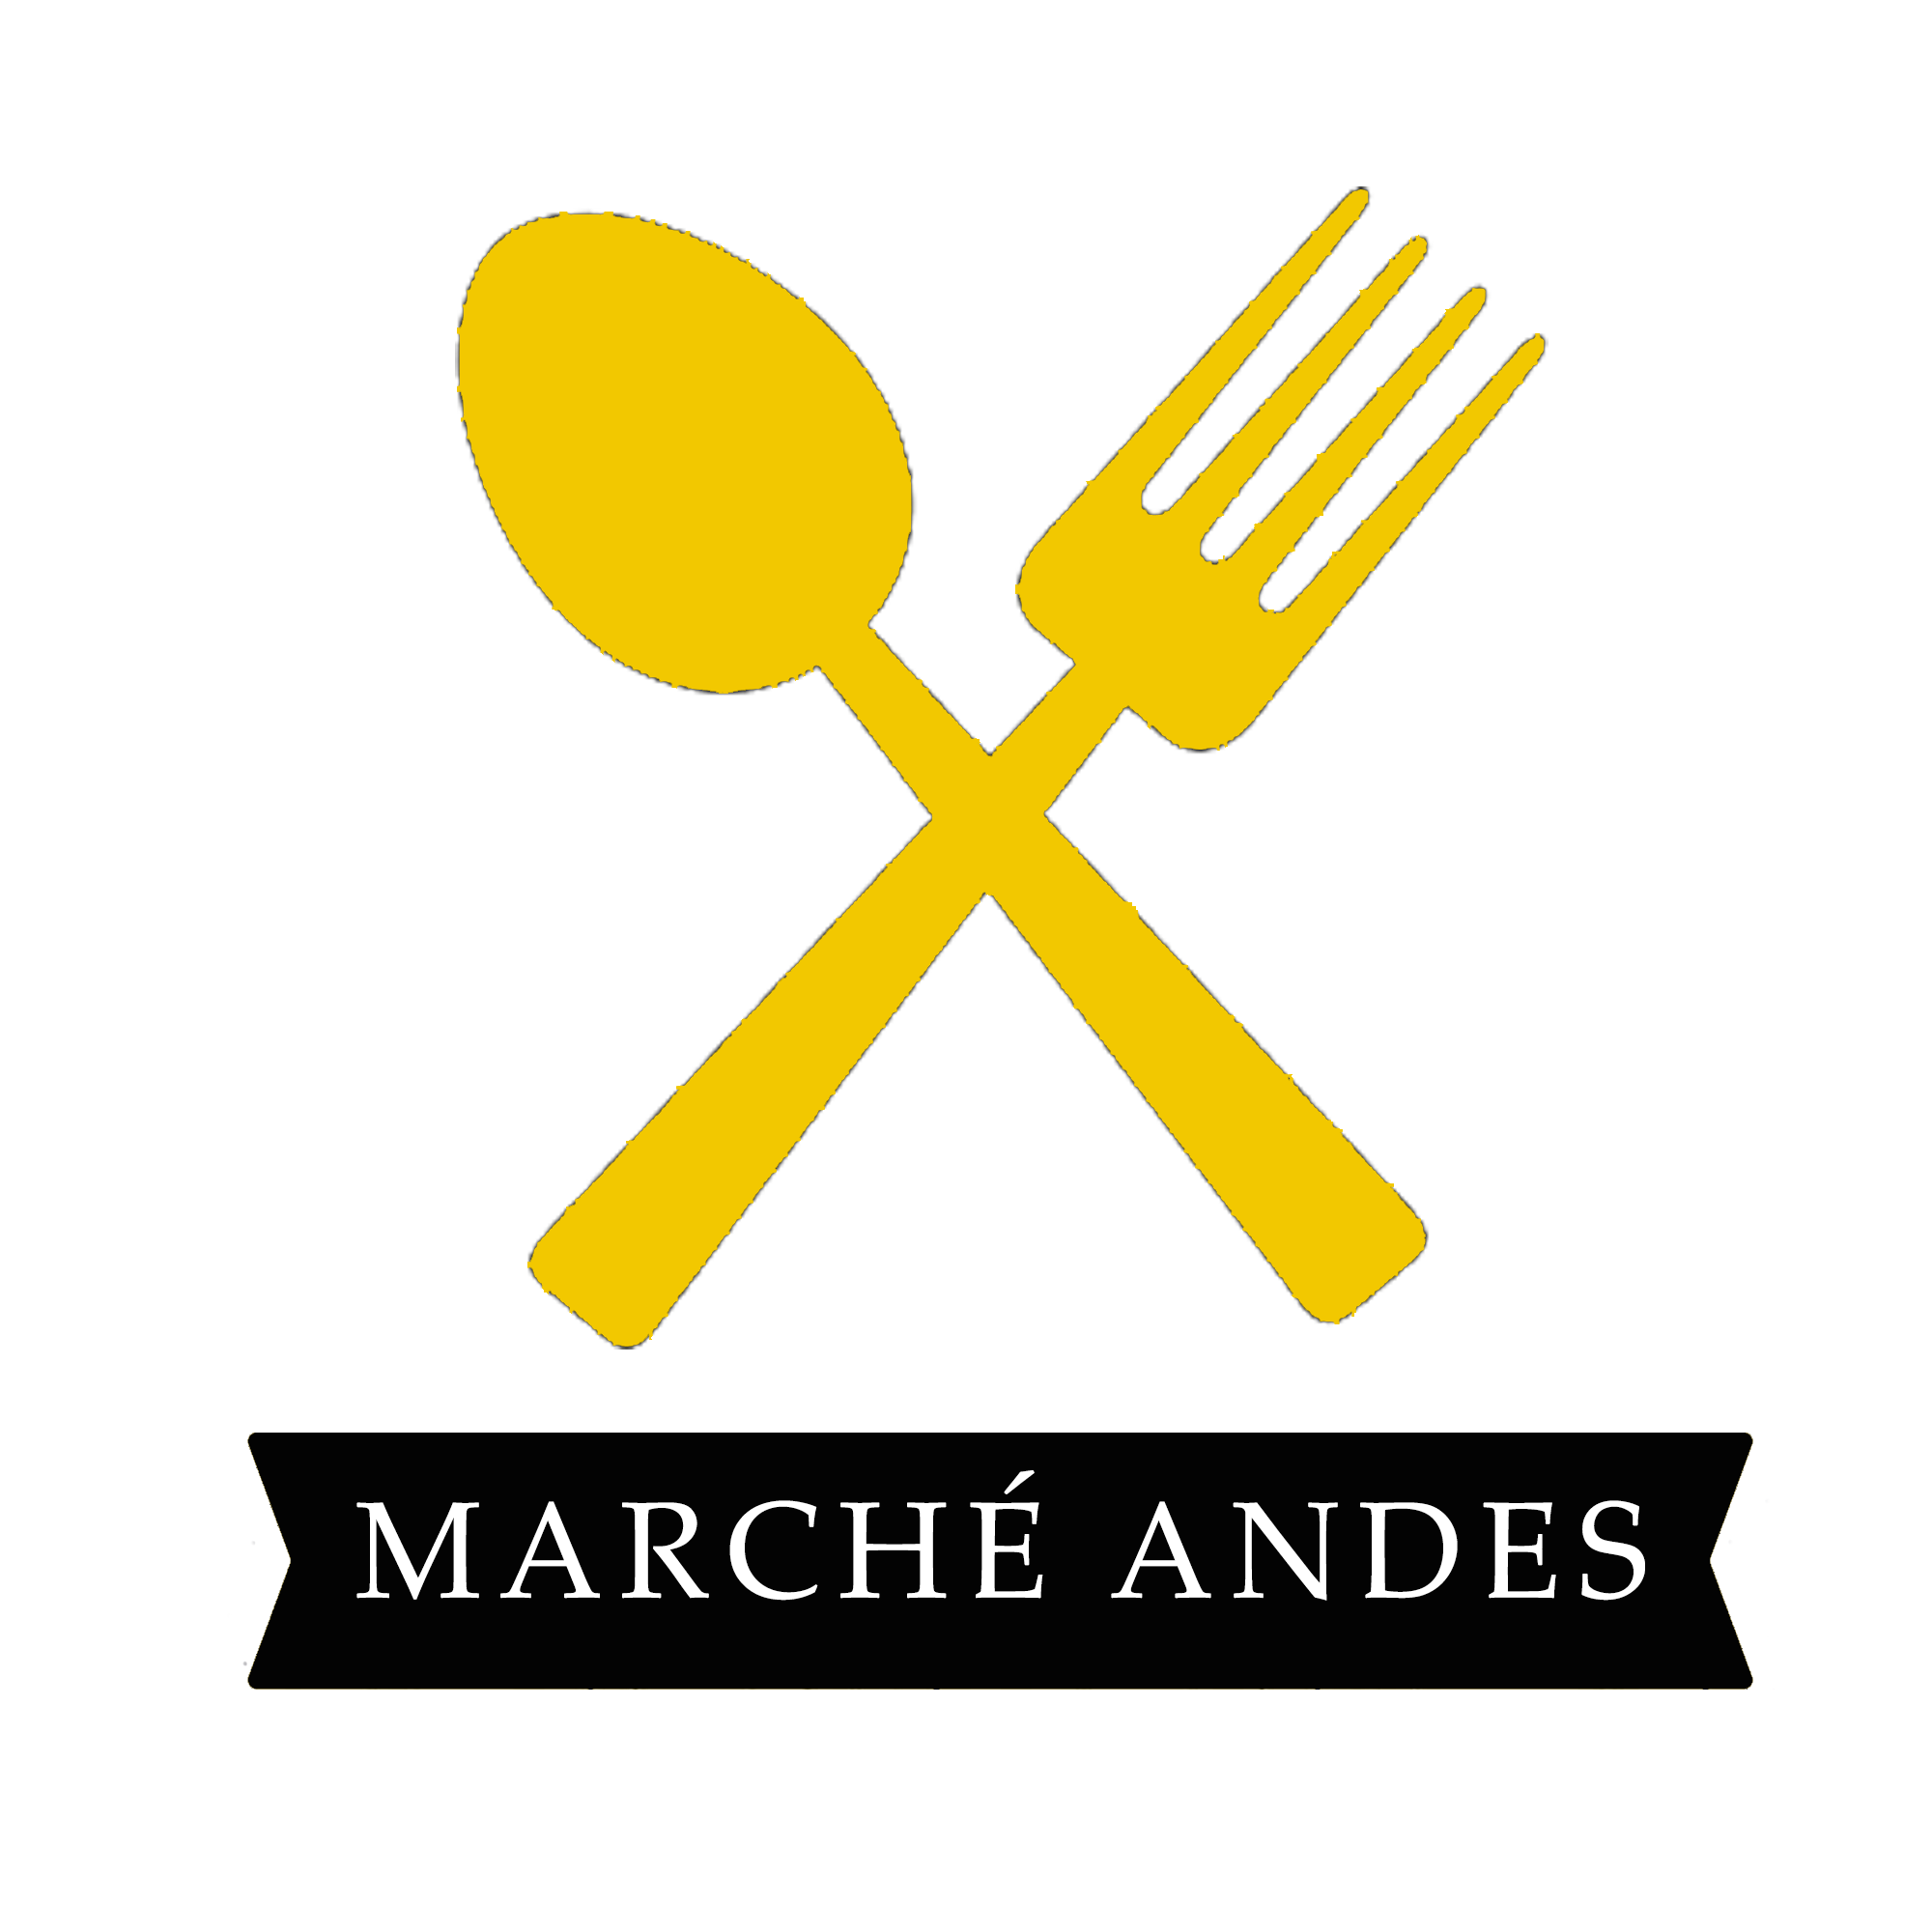 Restaurant Marché Andes